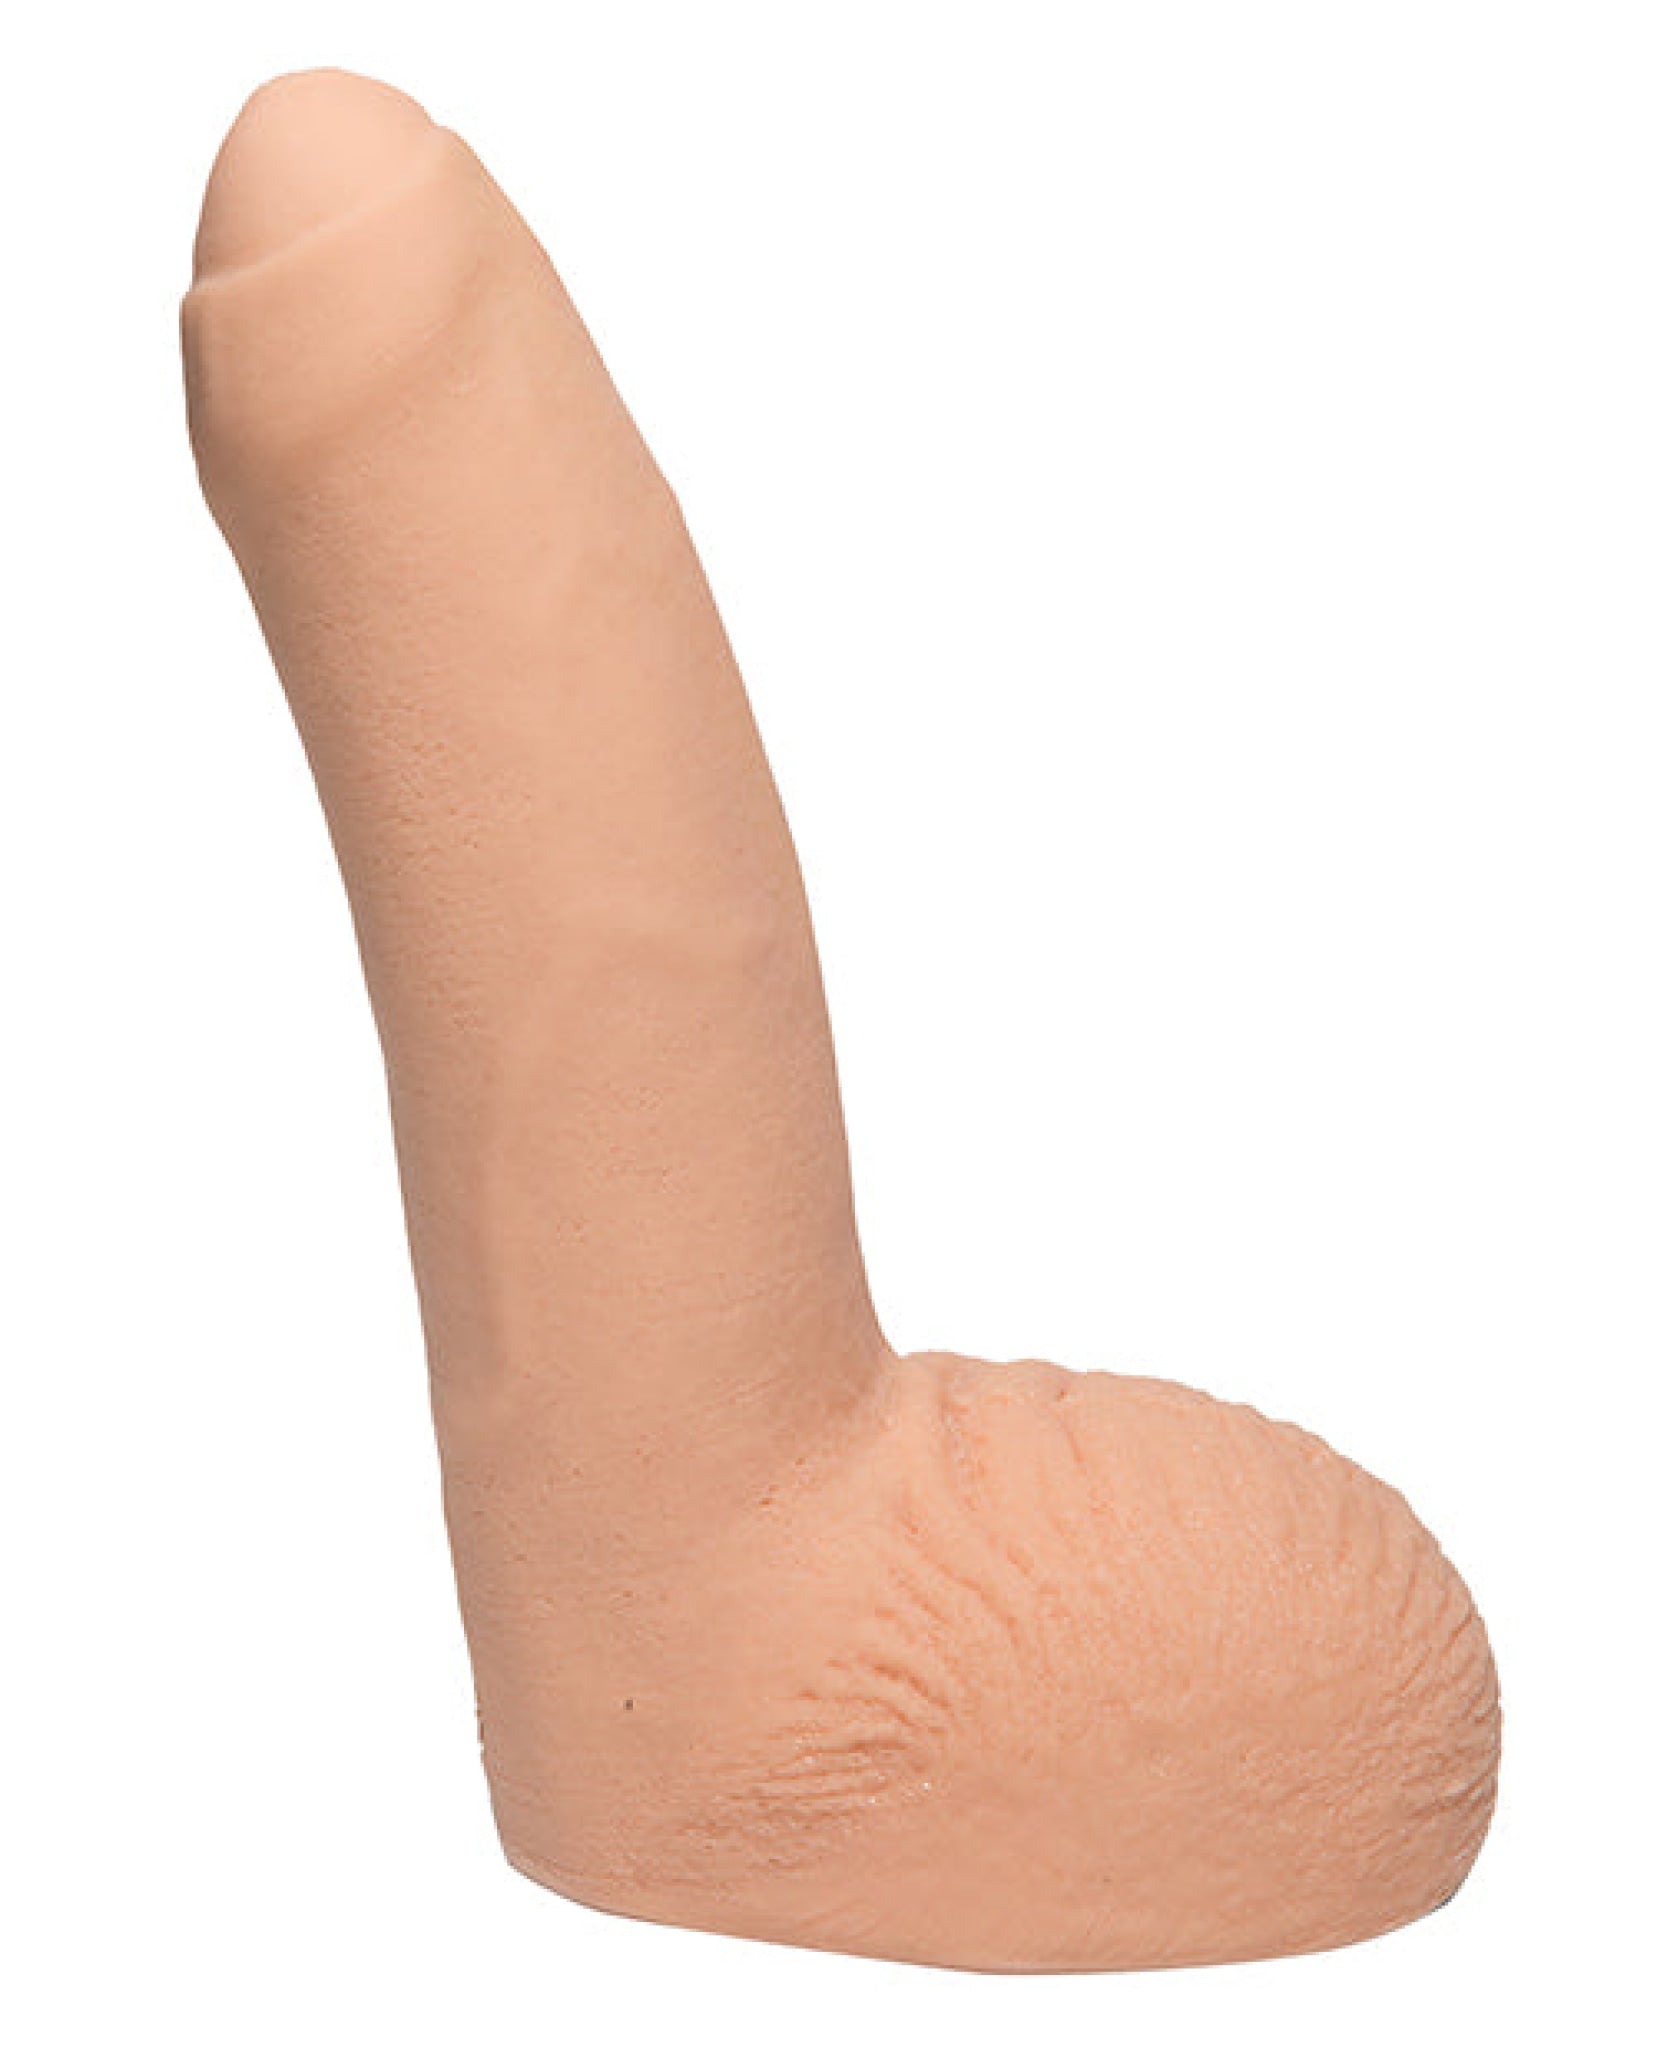 Signature Cocks Ultraskyn 8" Cock W-removeable Vac-u-lock Suction Cup - William Seed Doc Johnson